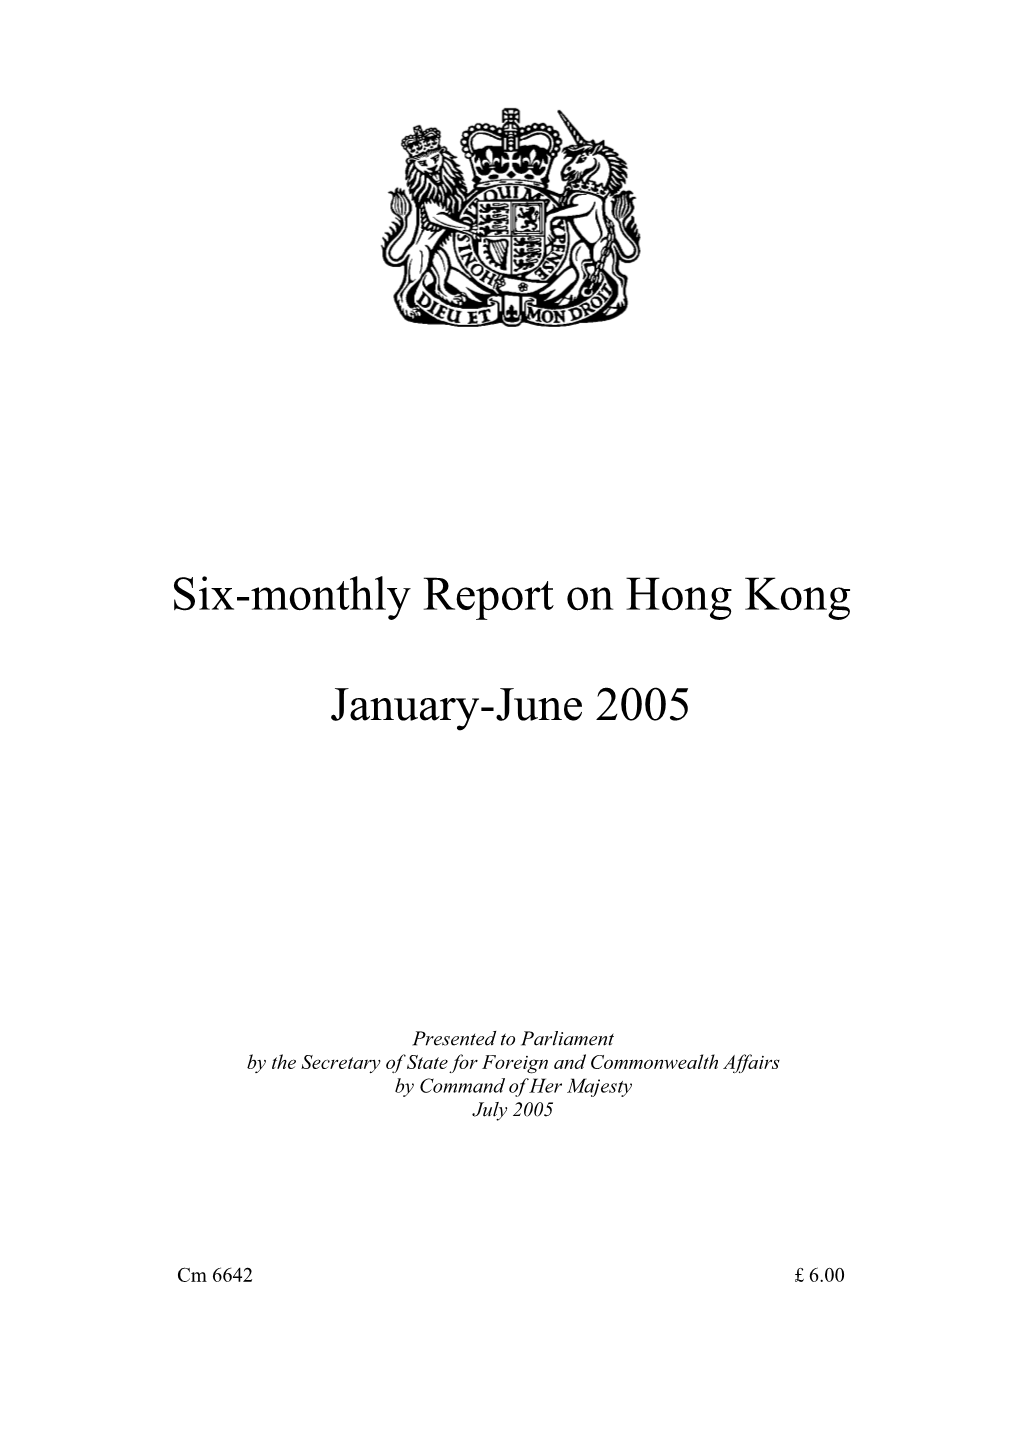 Six-Monthly Report on Hong Kong January-June 2005